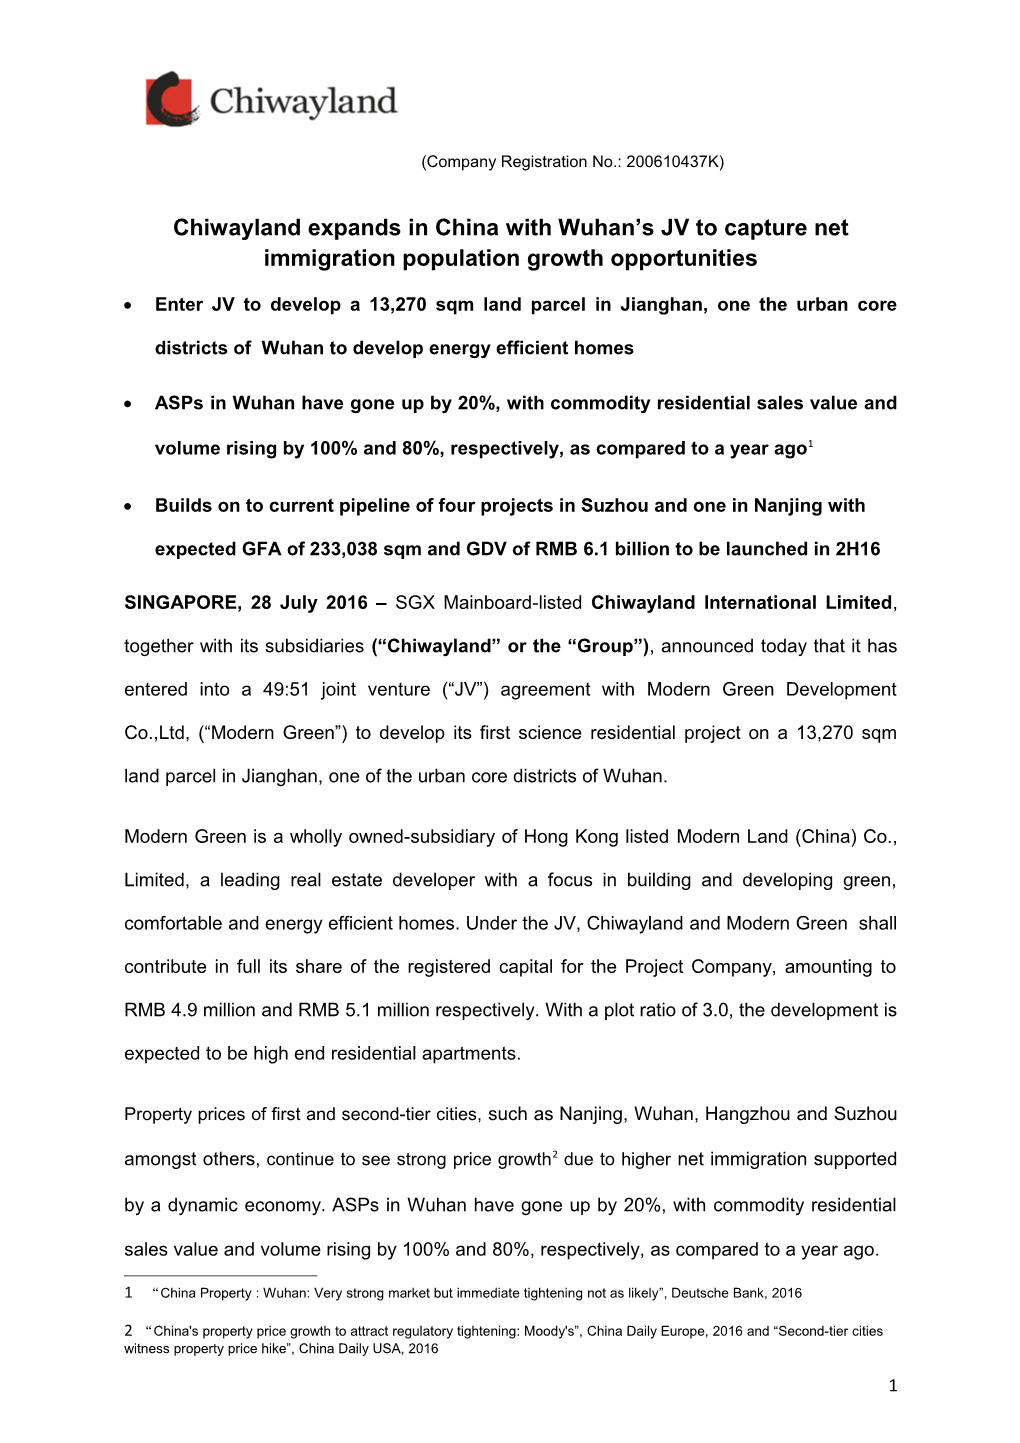 Chiwayland Expands in China with Wuhan S JV to Capture Net Immigration Population Growth